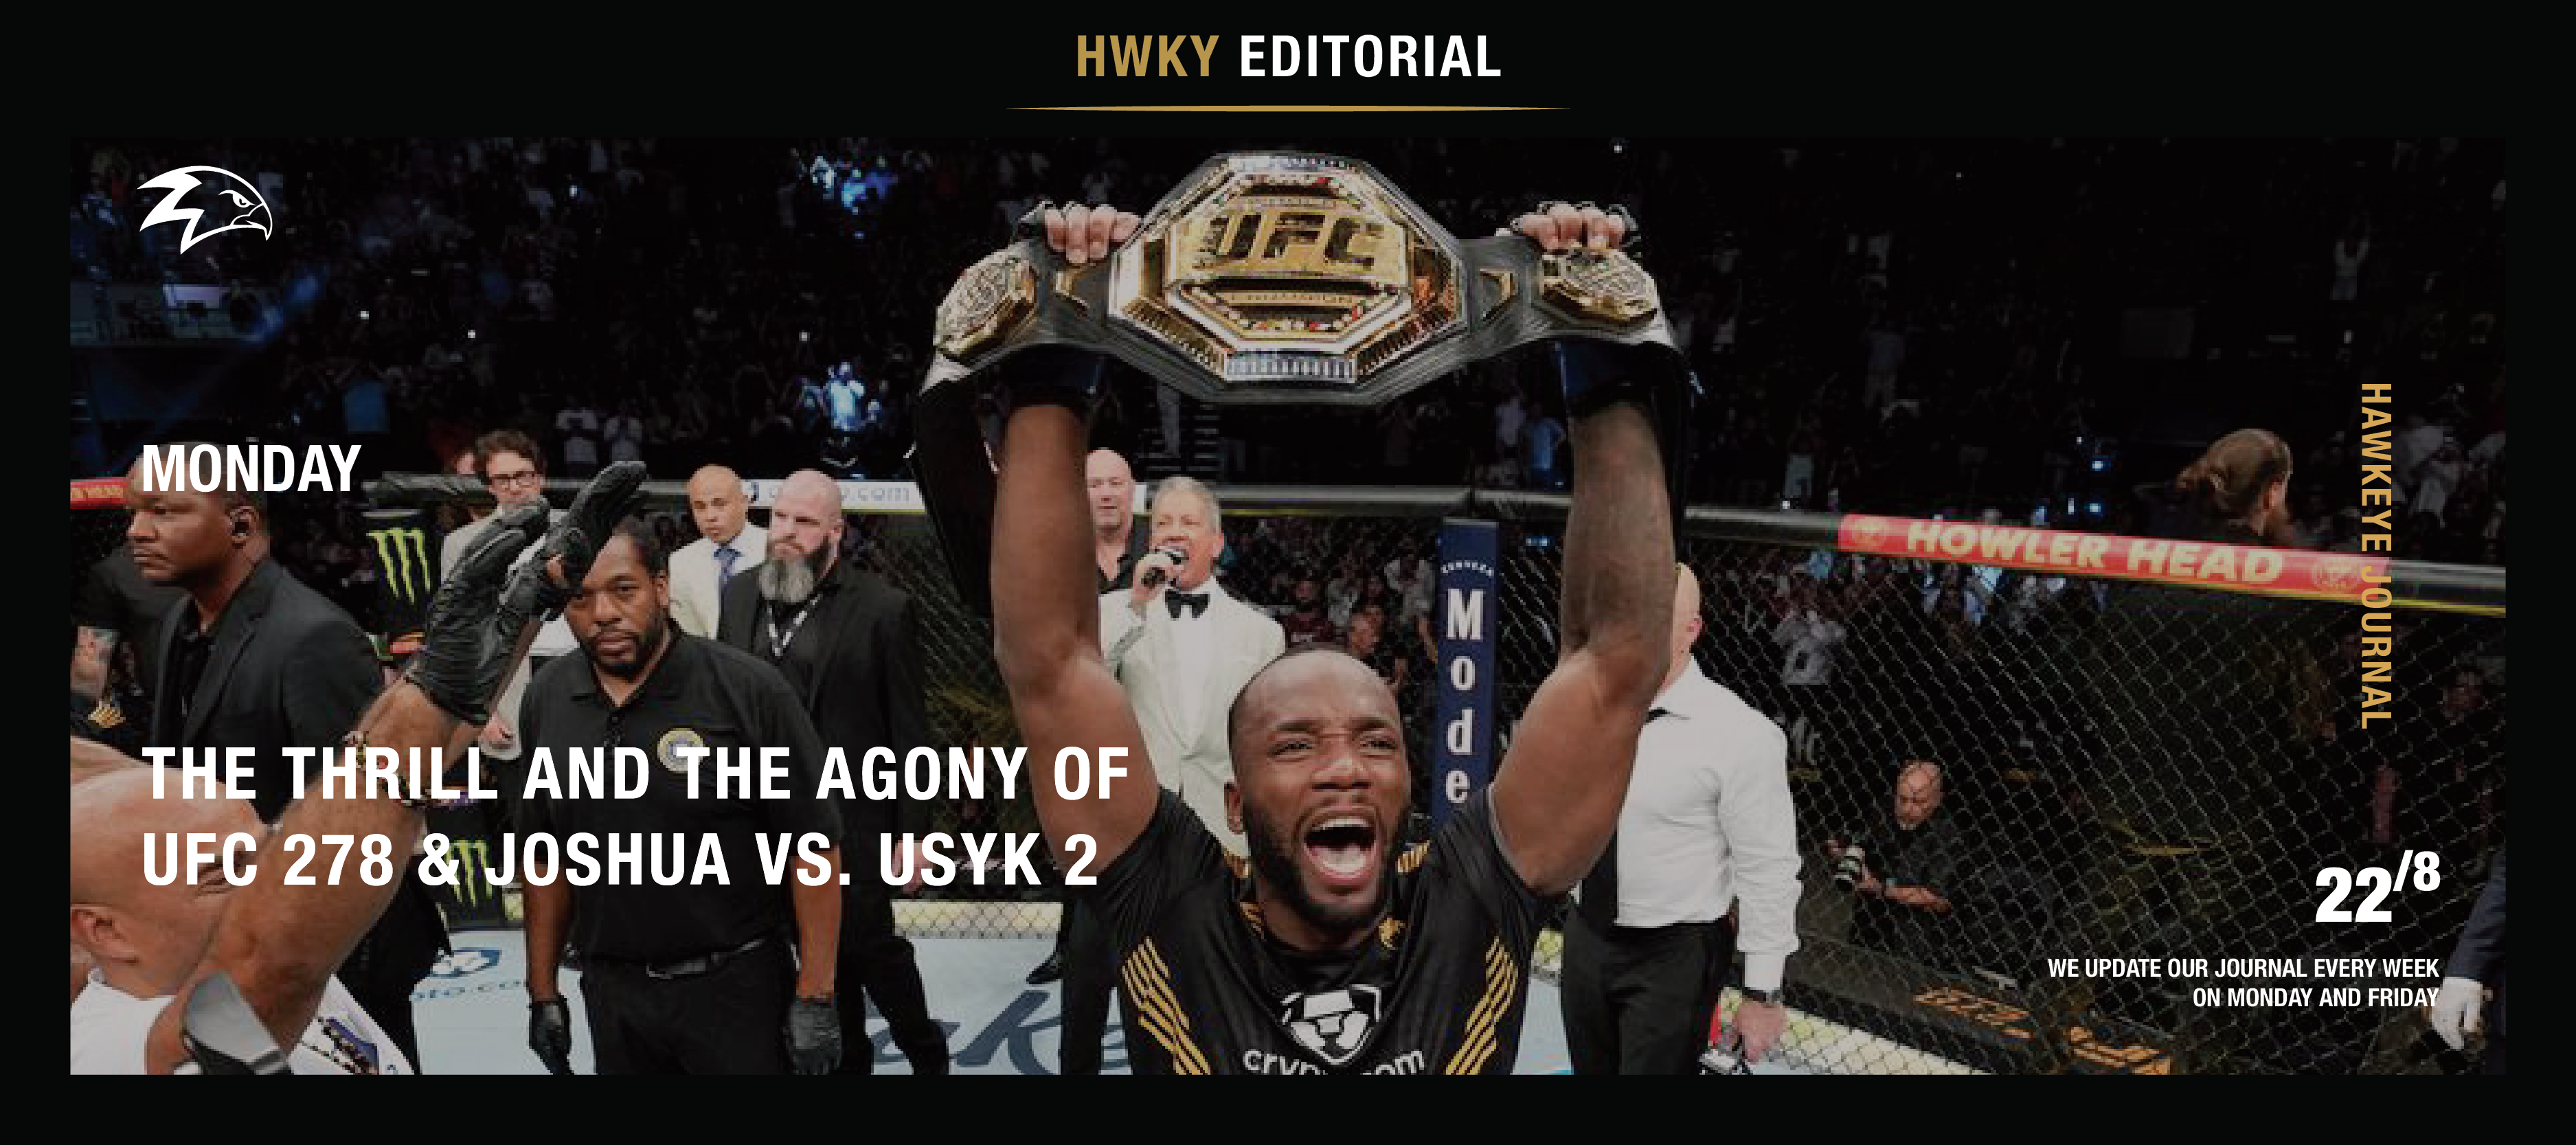 The Thrill And The Agony Of UFC 278 & Joshua Vs. Usyk 2